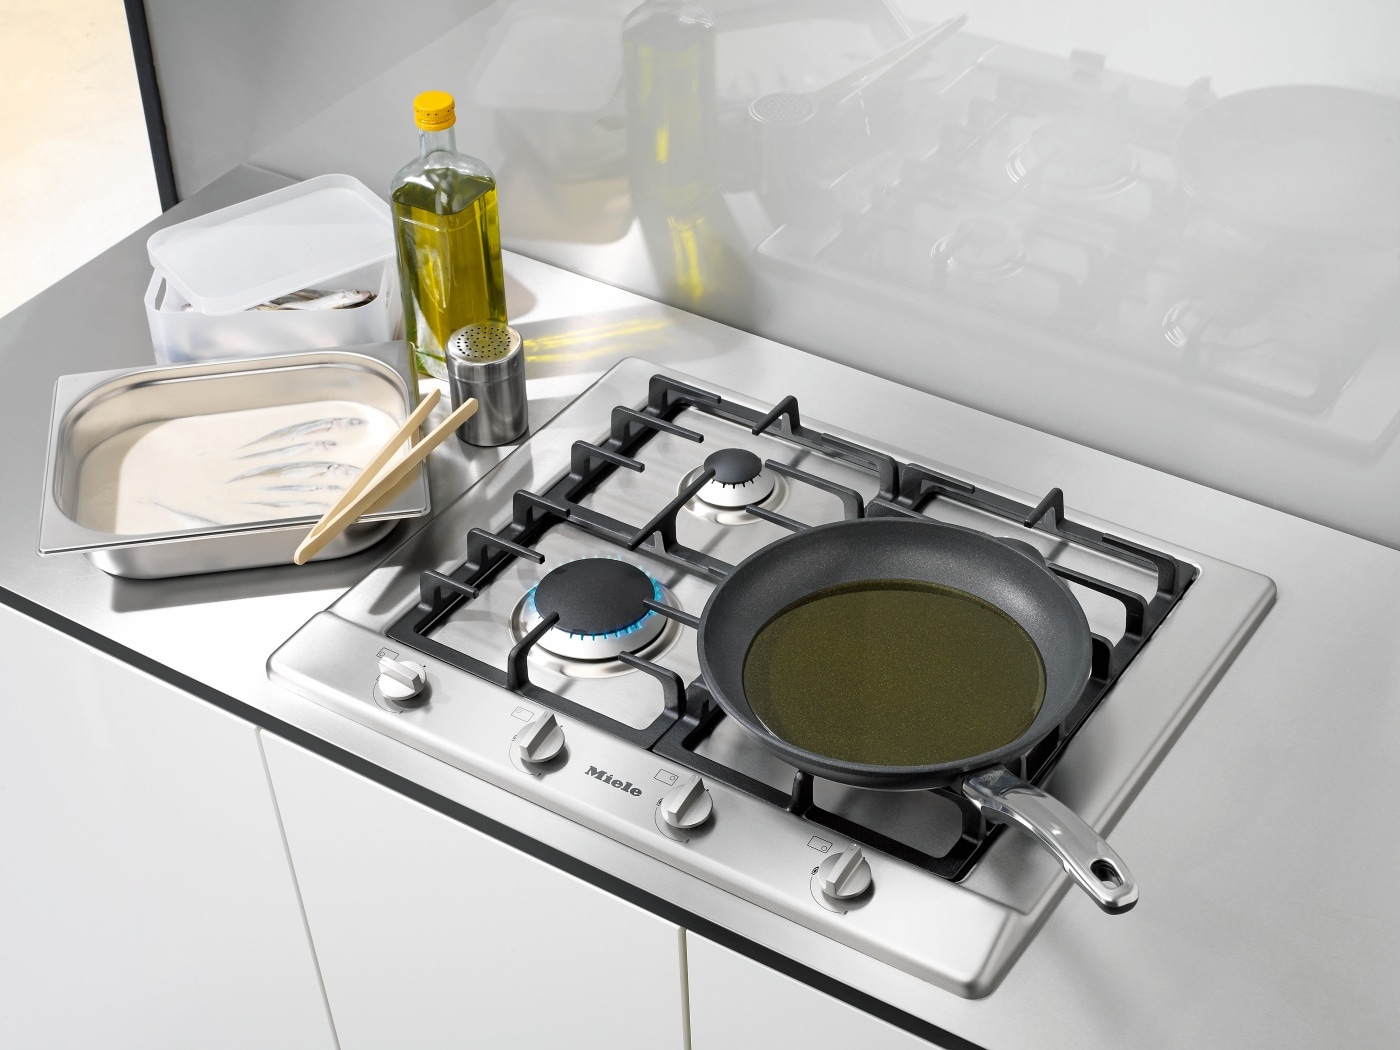 Hobs - KM 2010 Stainless steel - 4